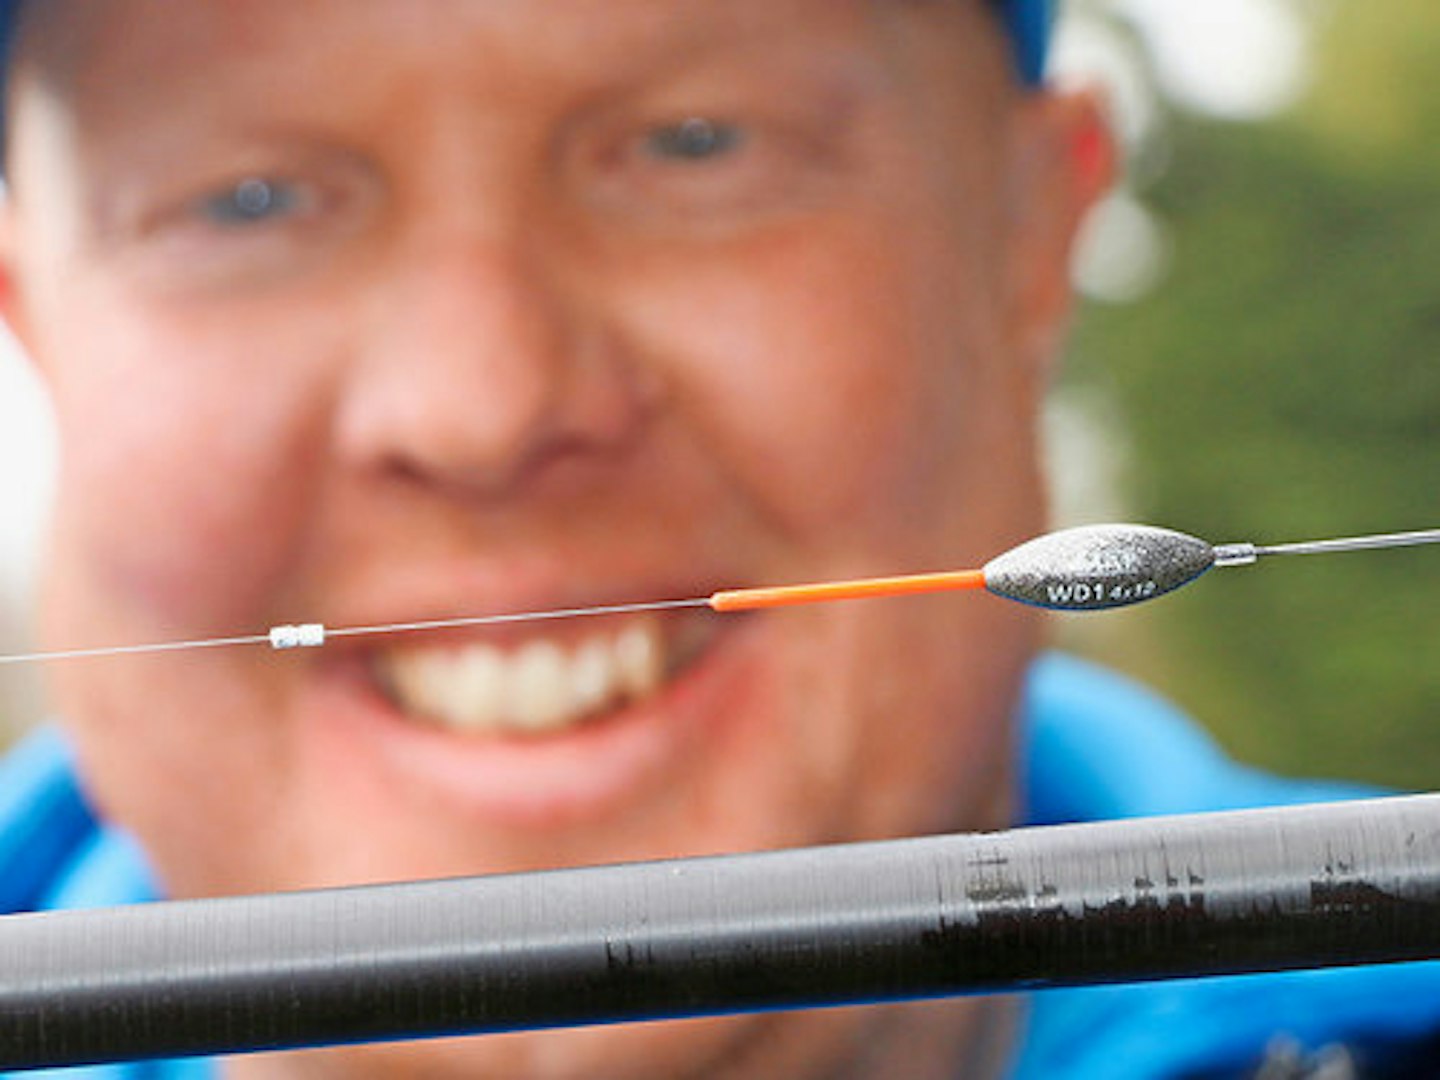 40 OF THE BEST RIVER FISHING TIPS